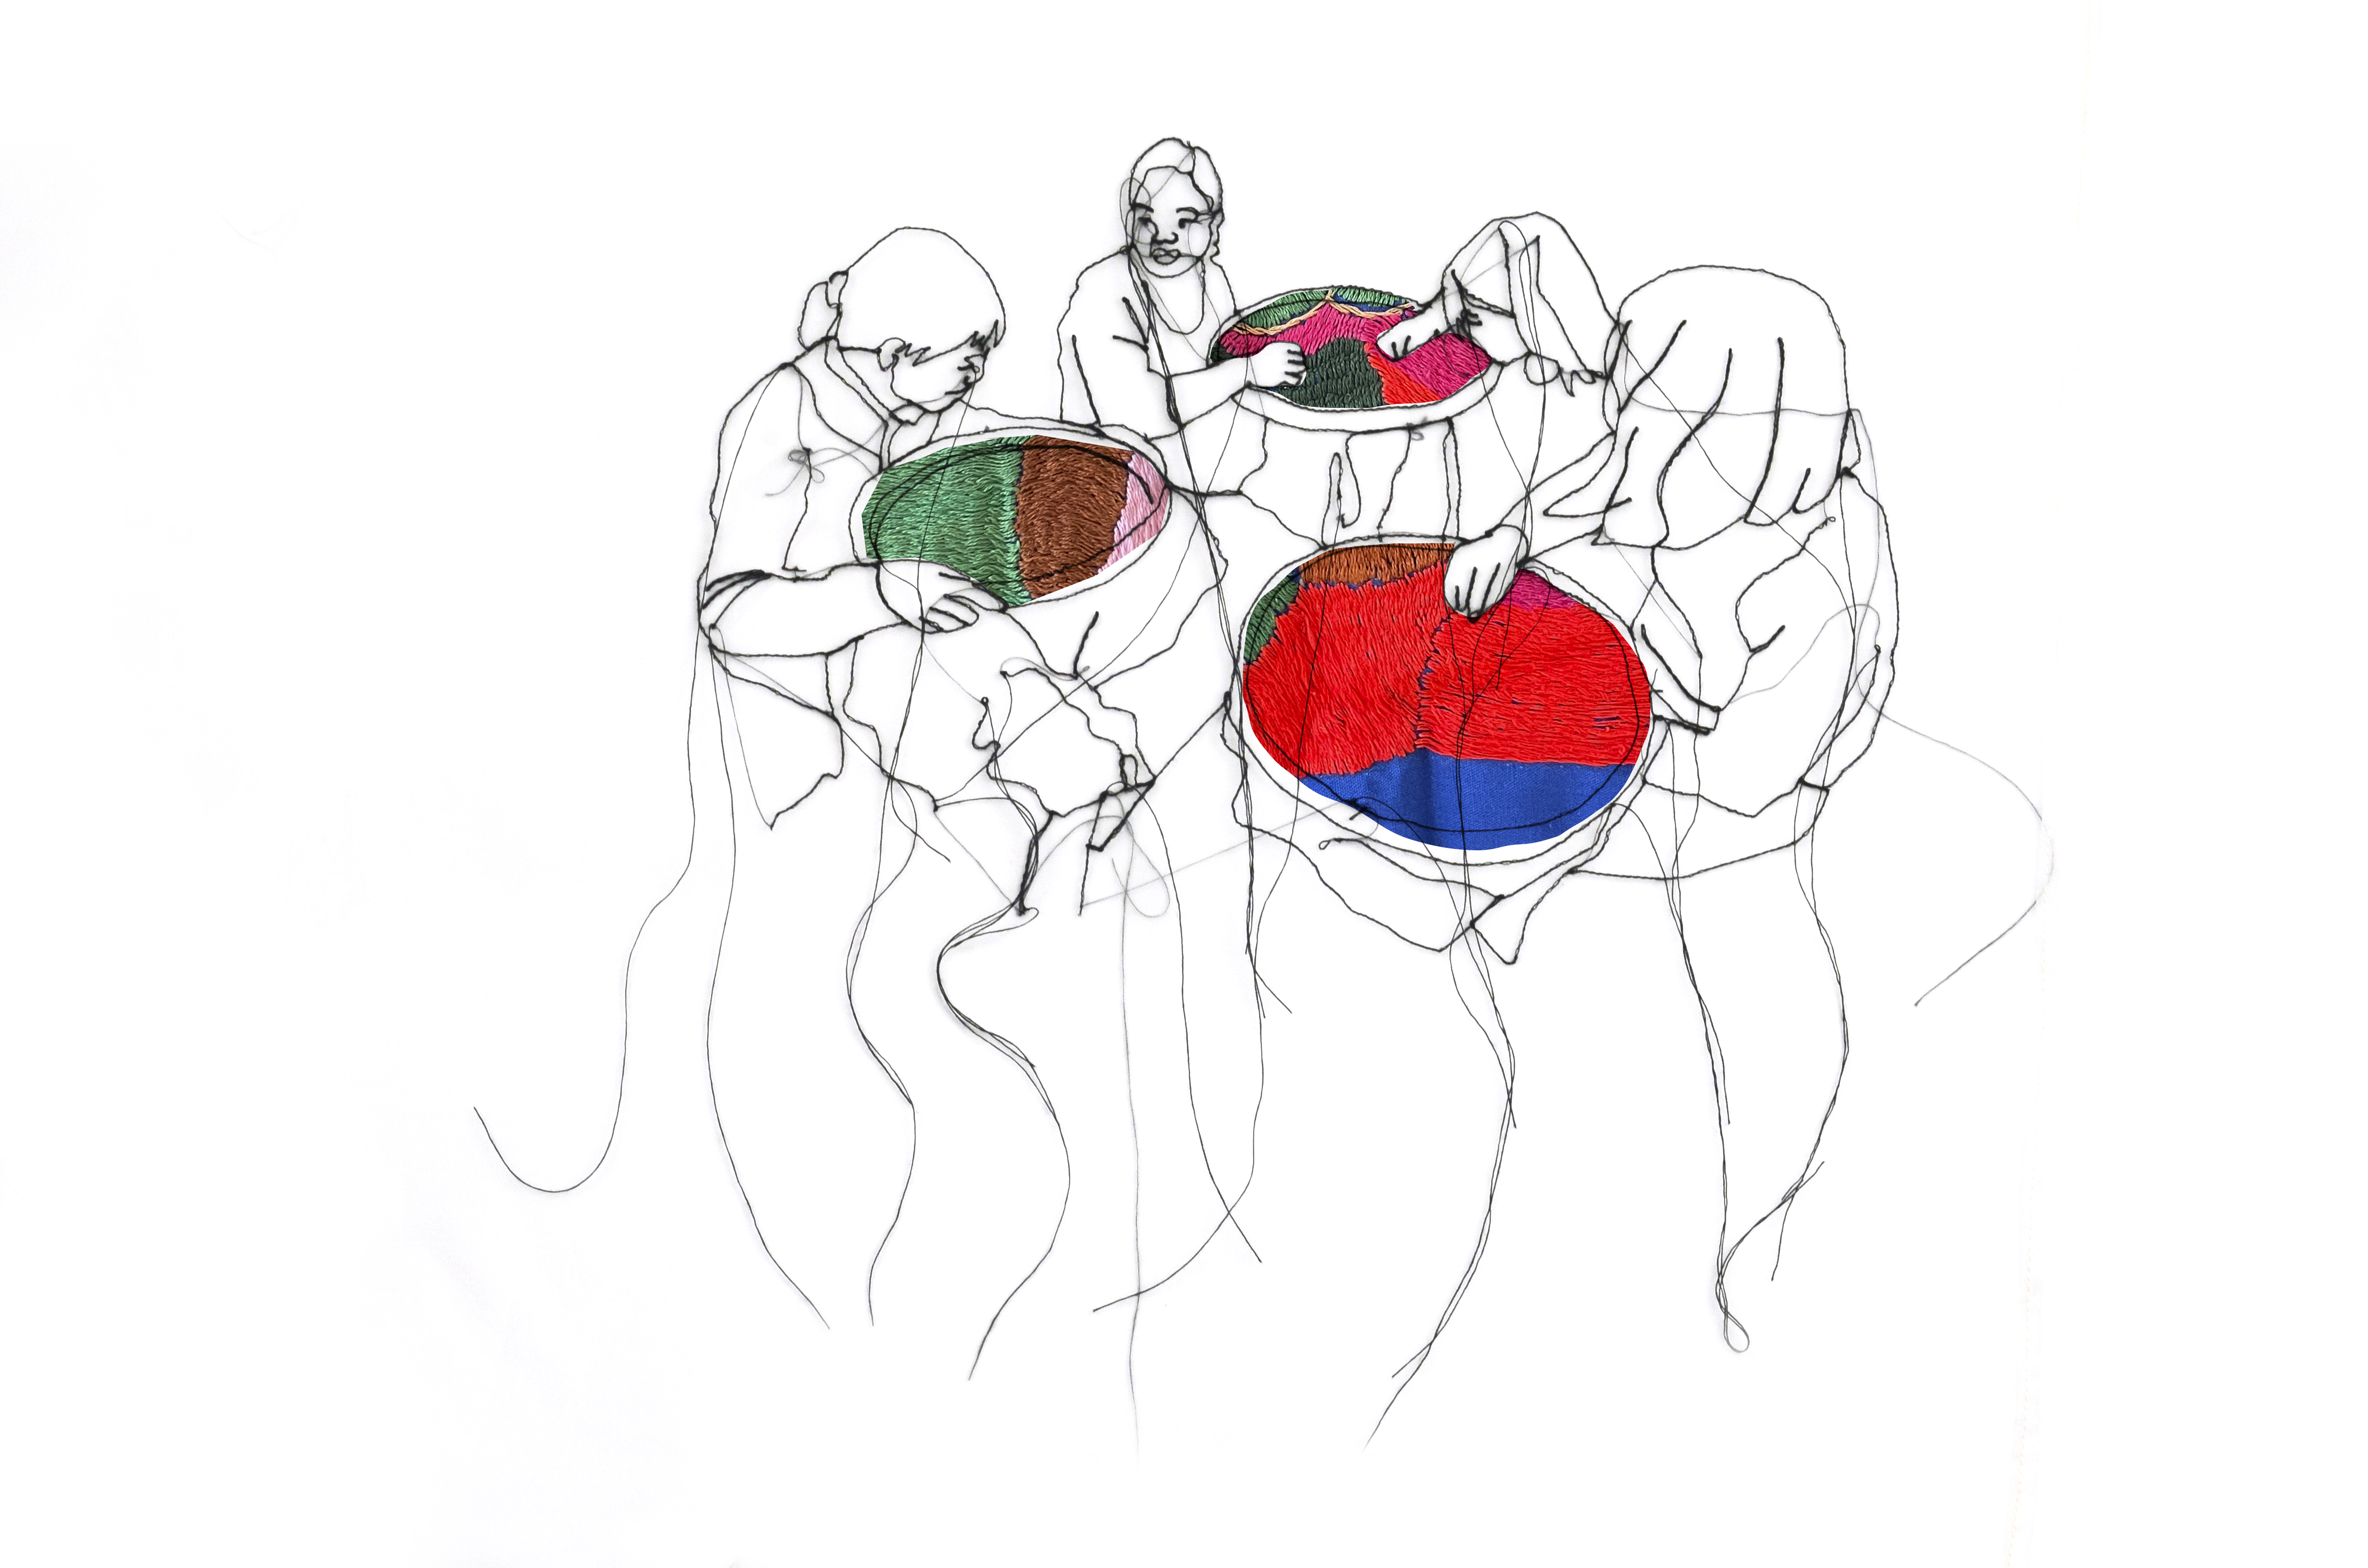 Sketch drawing of four women weaving on round looms. 